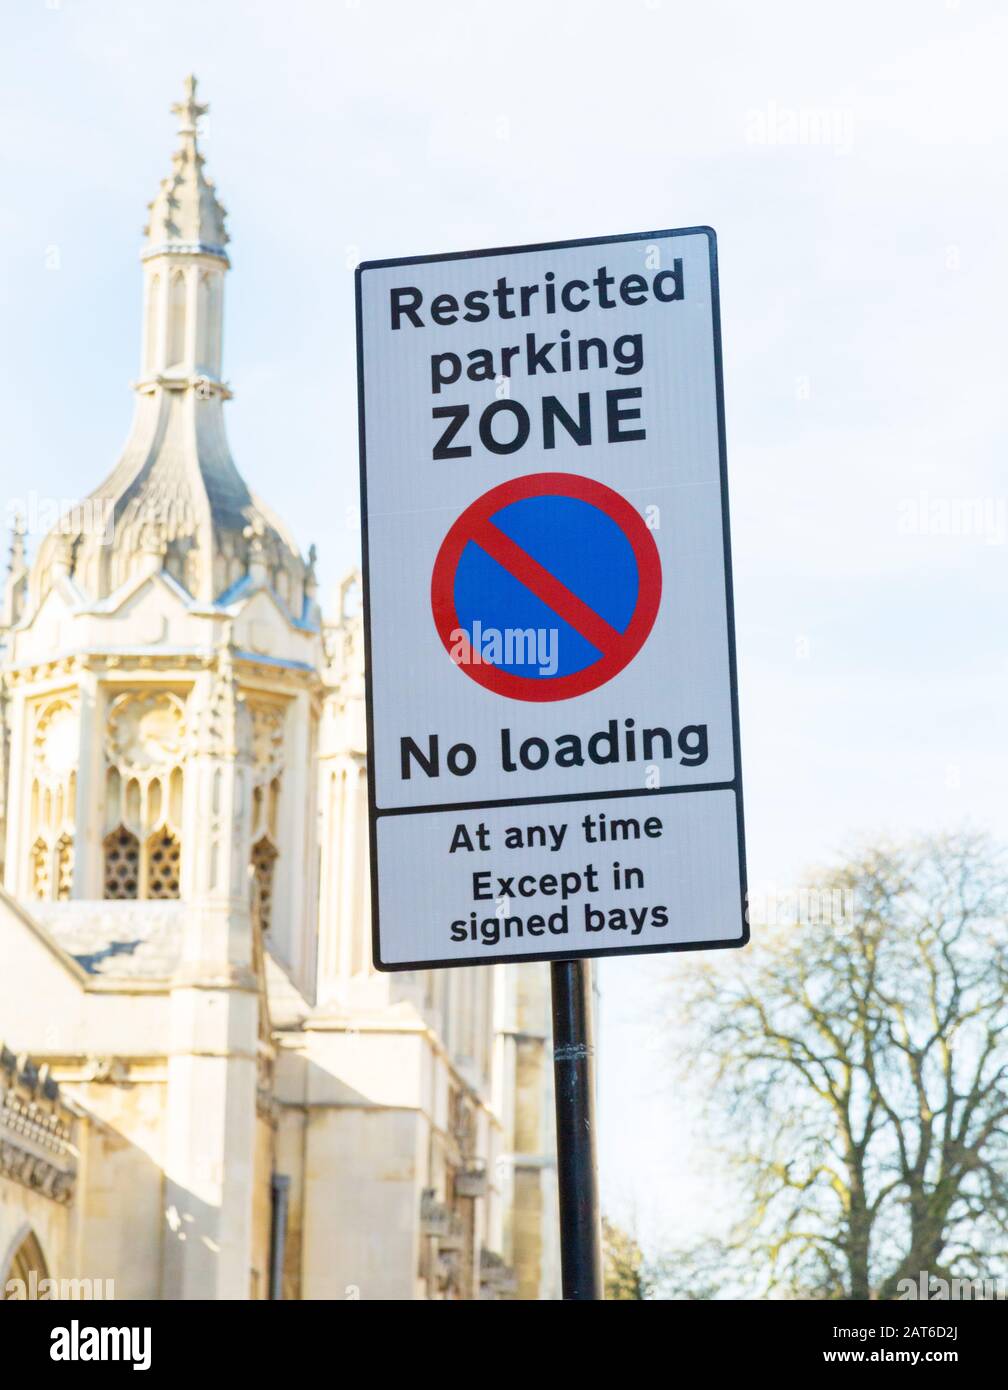 Restricted parking sign in the UK Stock Photo